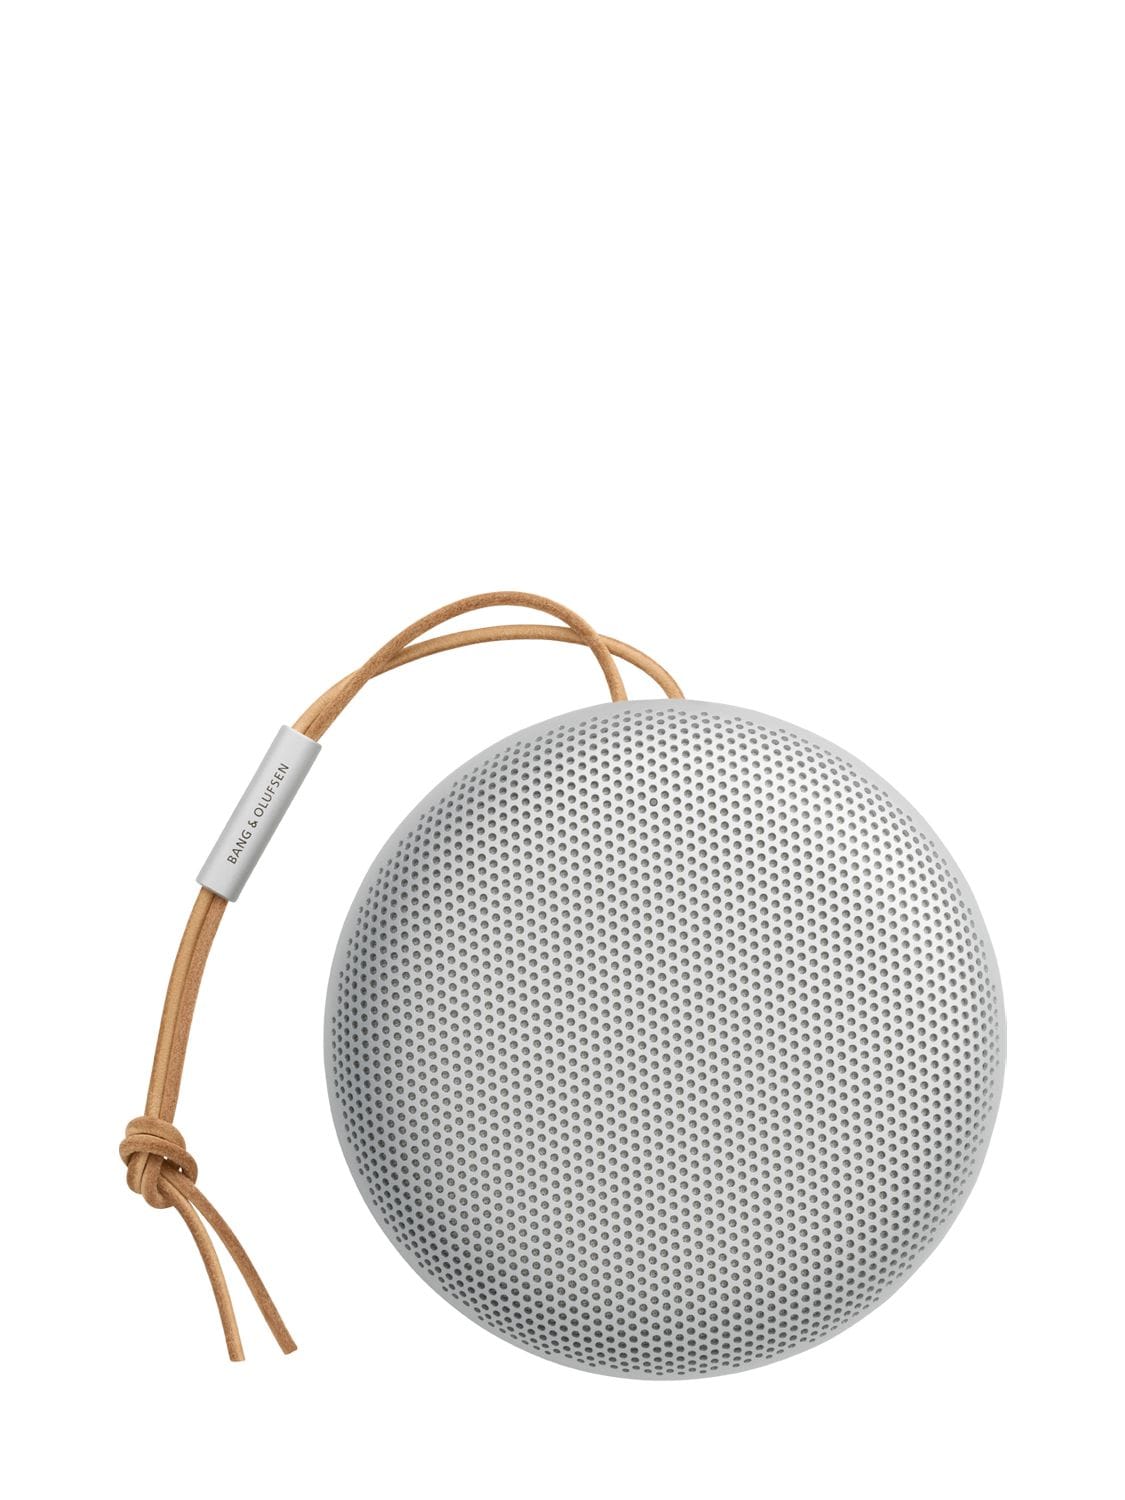 Beoplay A1 2nd Generation Speaker – HOME > HOME DÉCOR > TECH ACCESSORIES